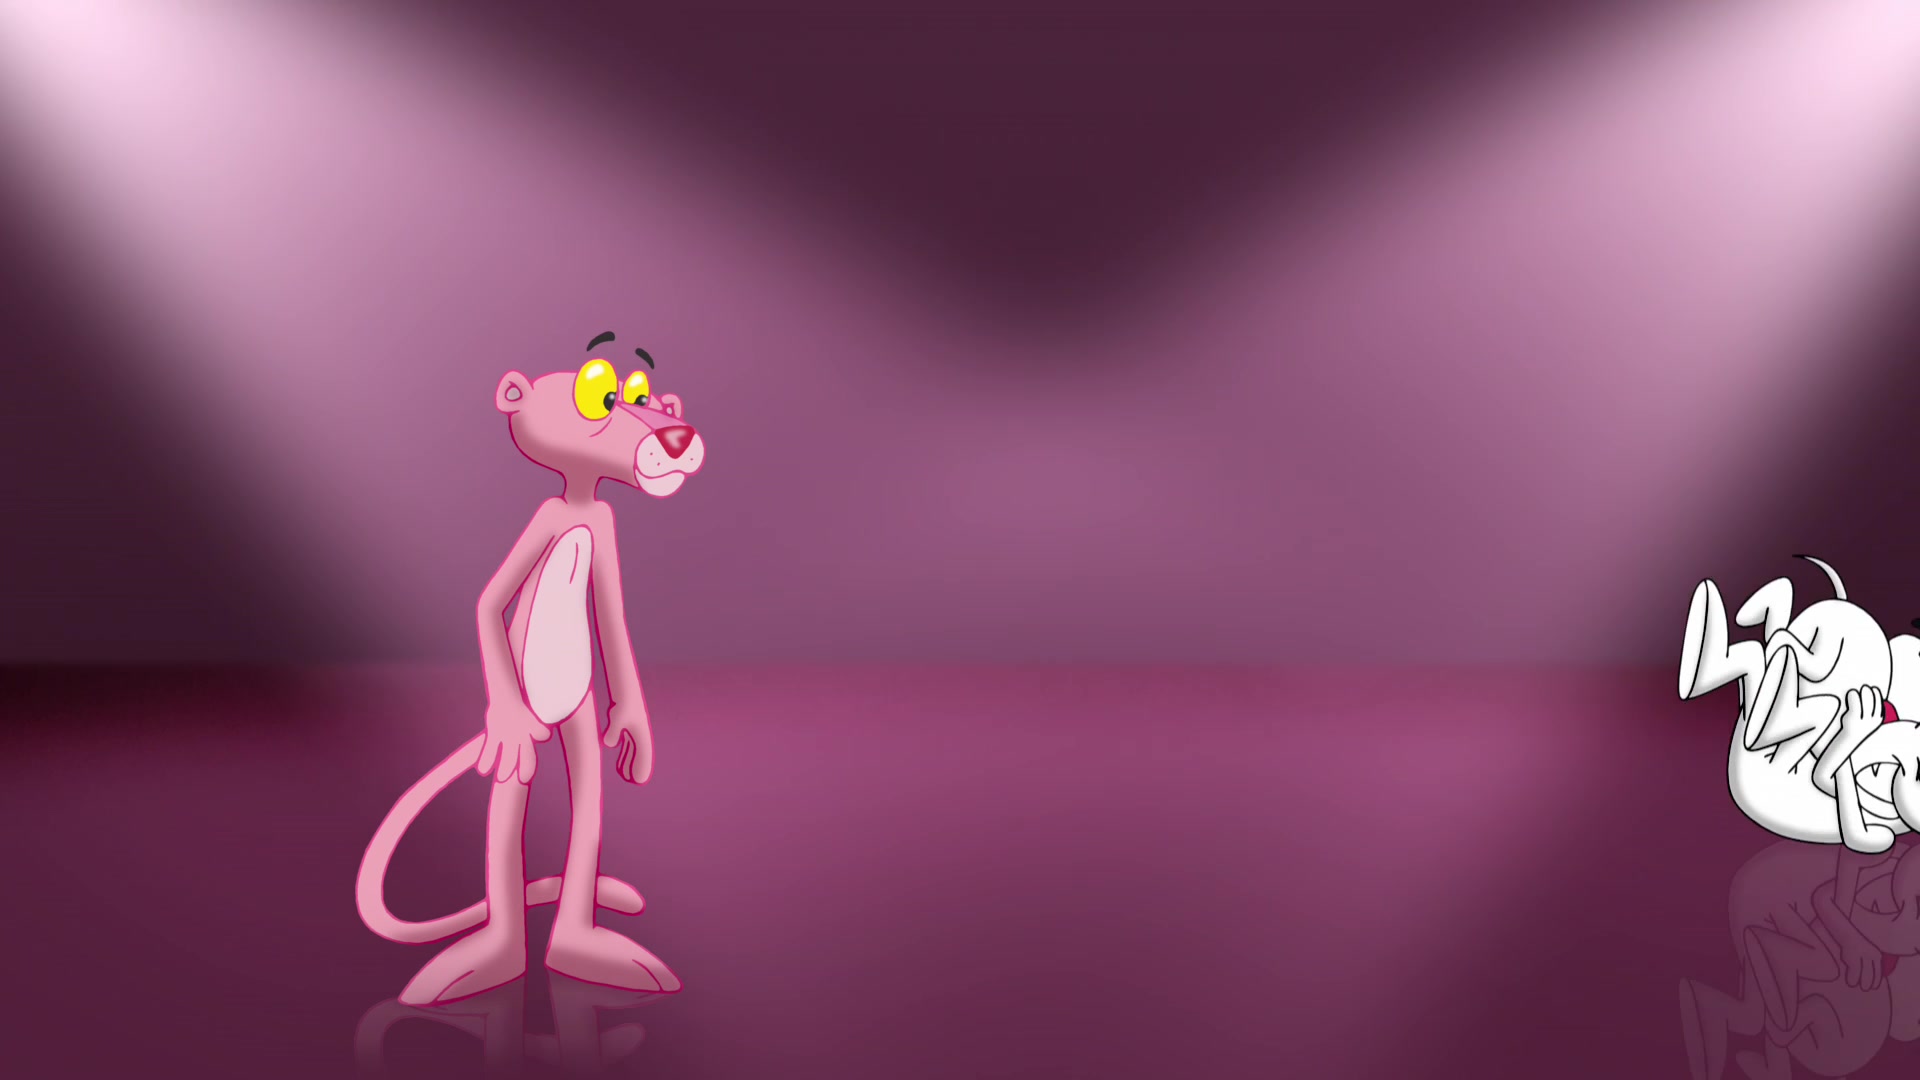 The Pink Panther Full HD Wallpapers • TrumpWallpapers